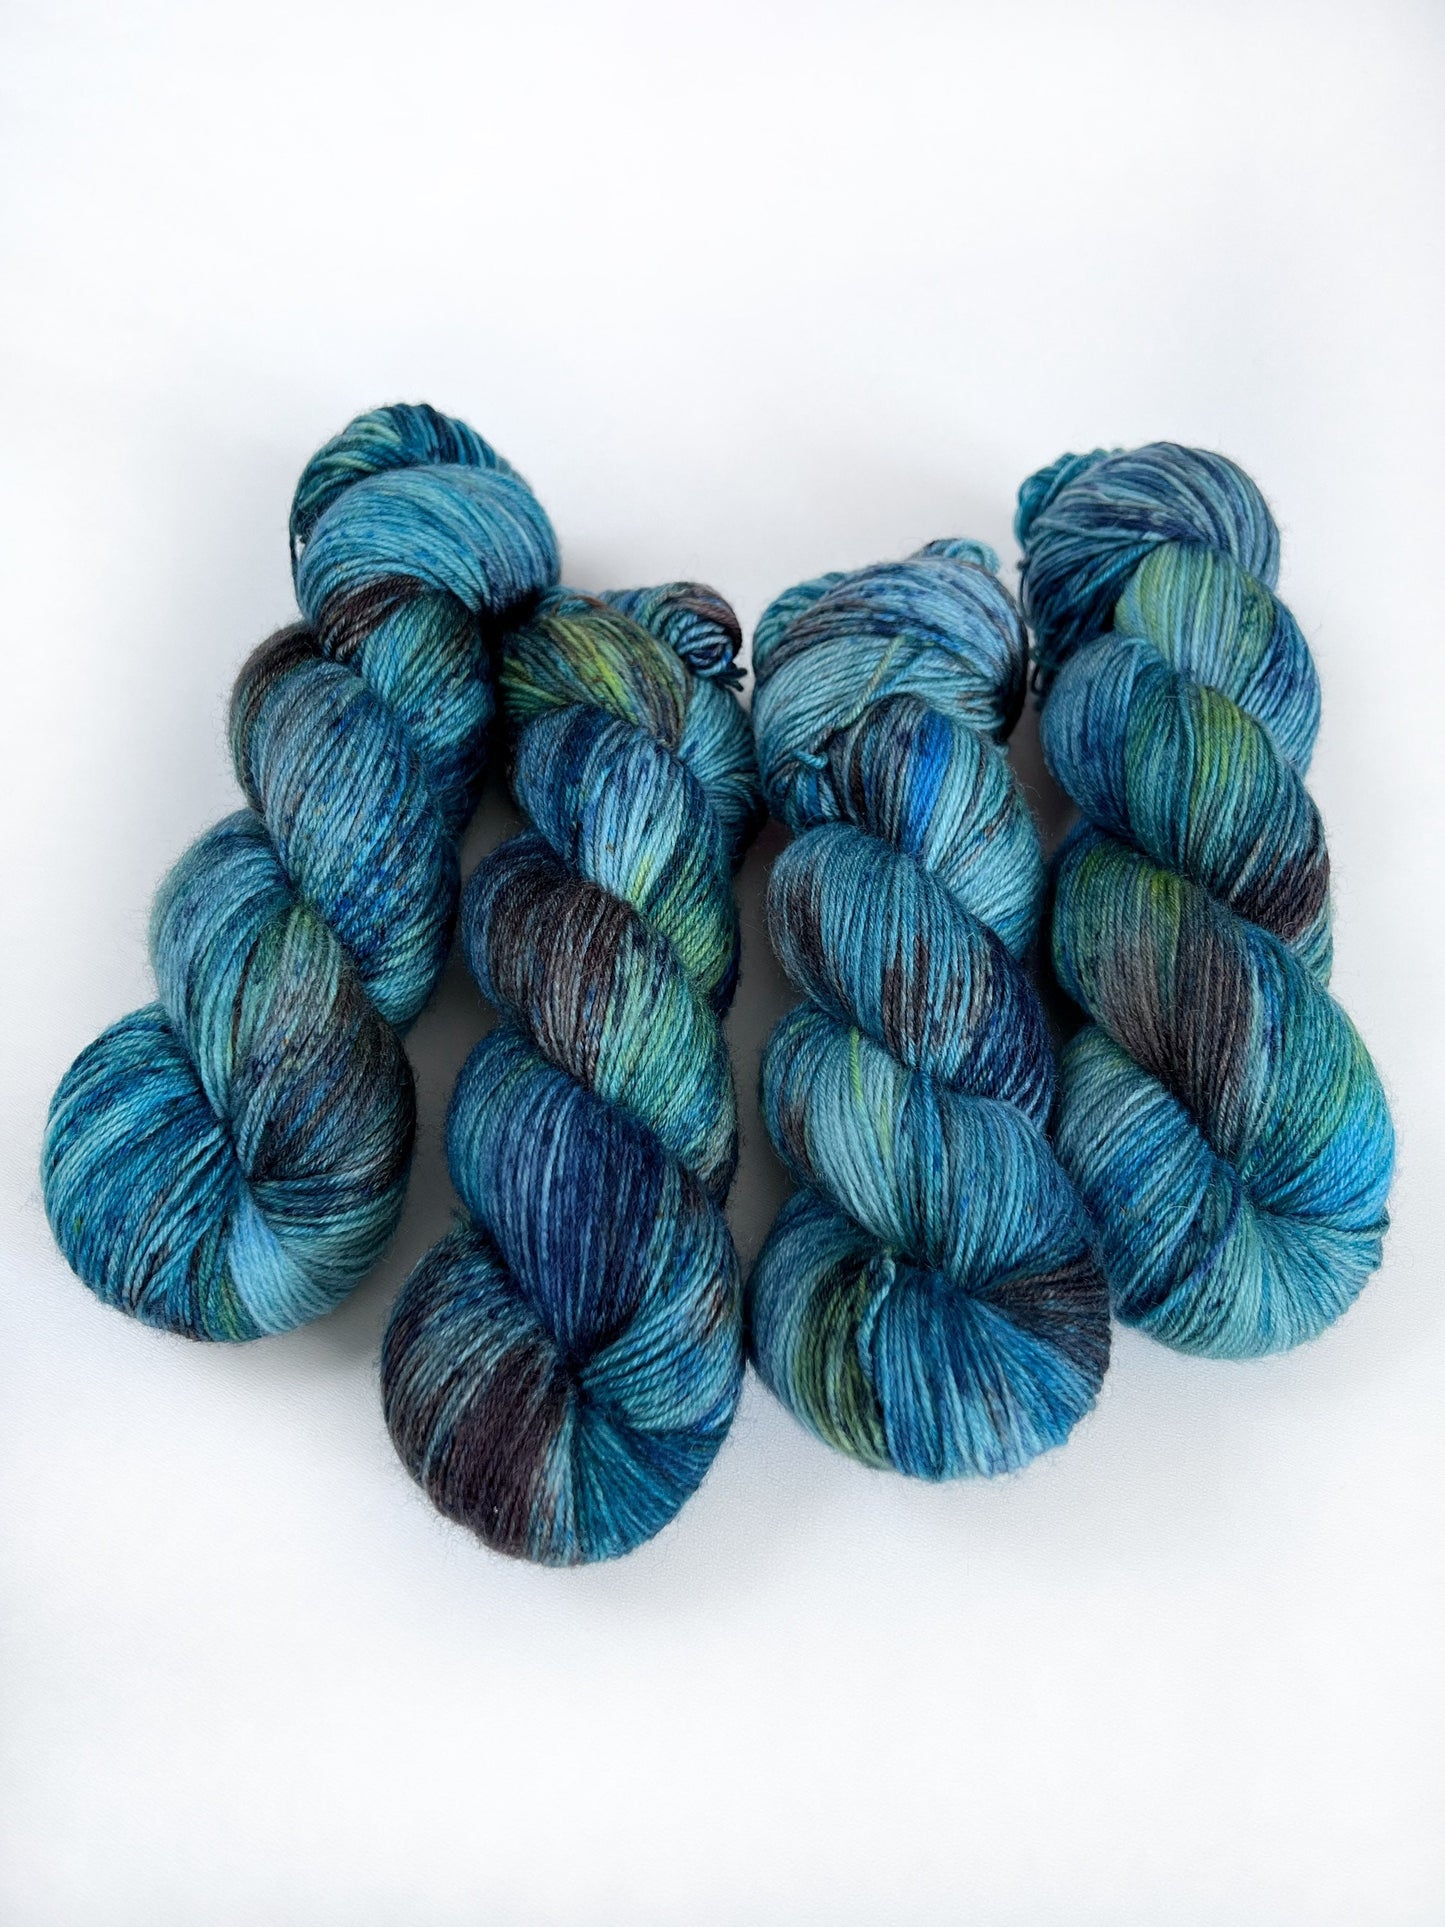 THE WORLD IS YOUR OYSTER - Teal Blue Green Grey Brown Speckled SUS or Worsted